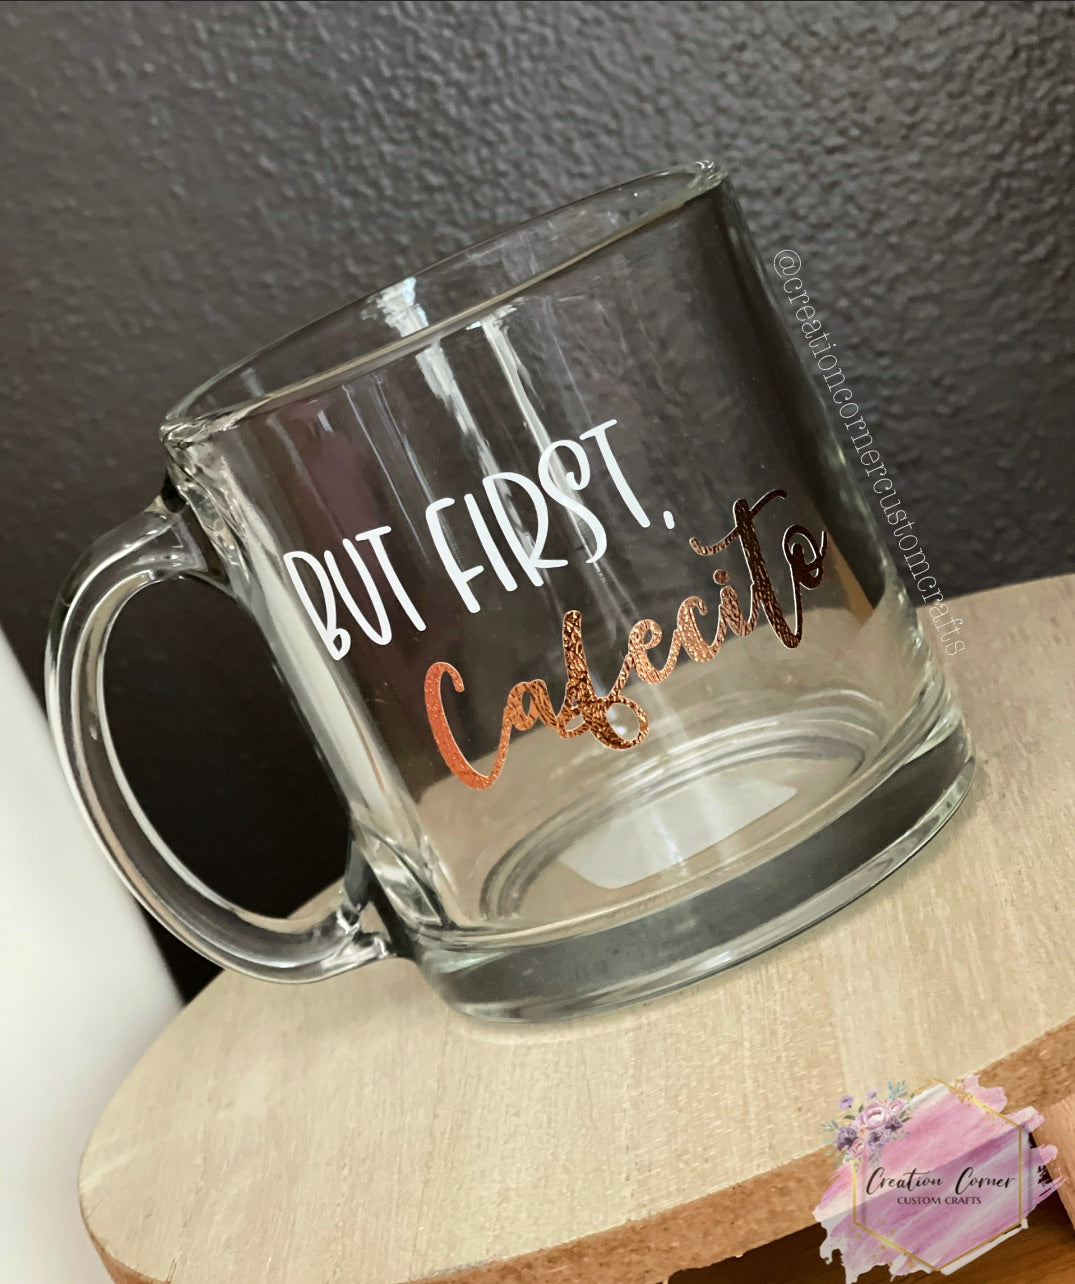 Clear Glass Coffee Mugs - Personalized